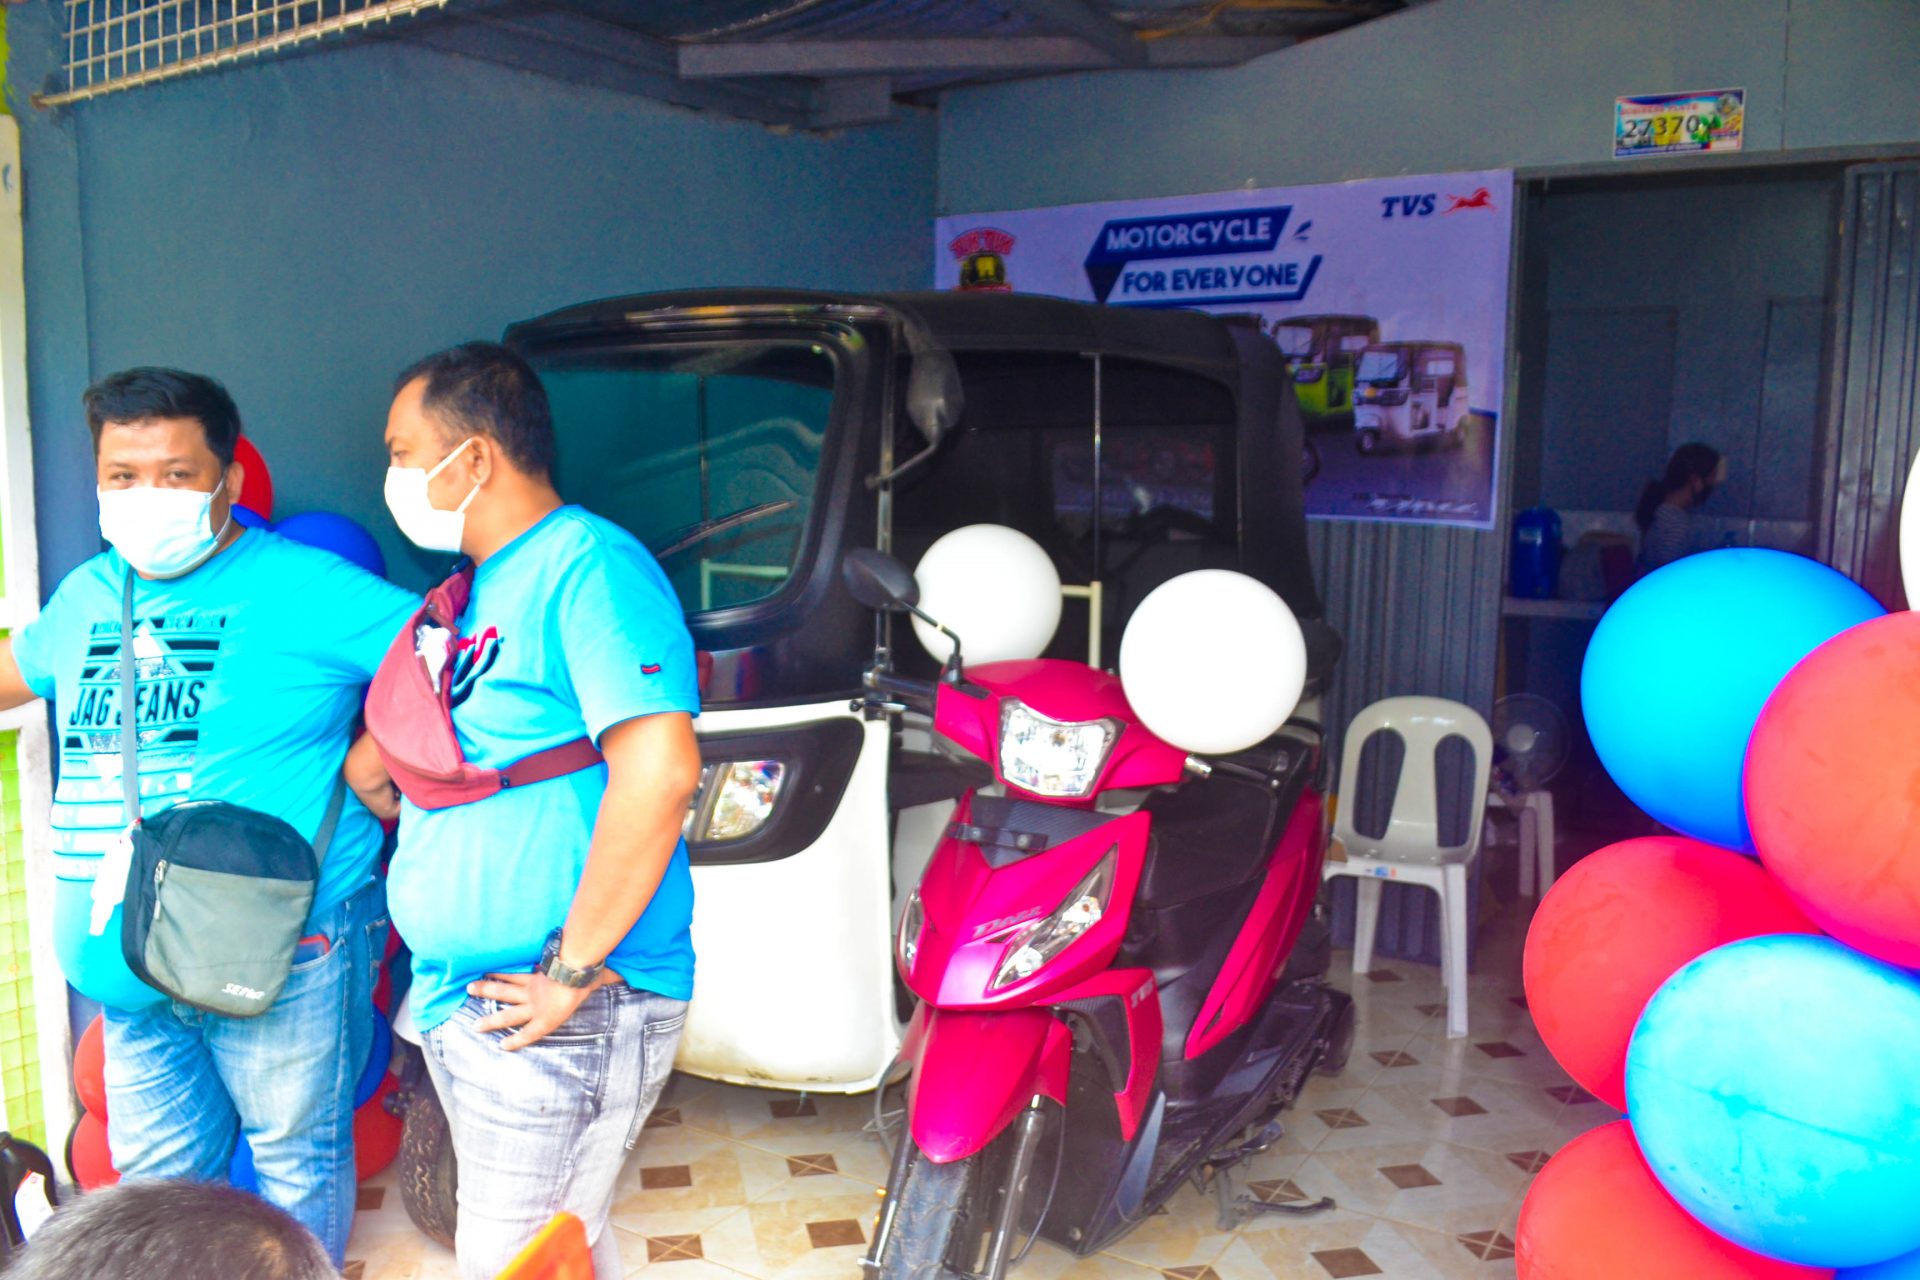 tuk tuk 3-wheelers antipolo opening day photo gallery tvs king number one for perfomance